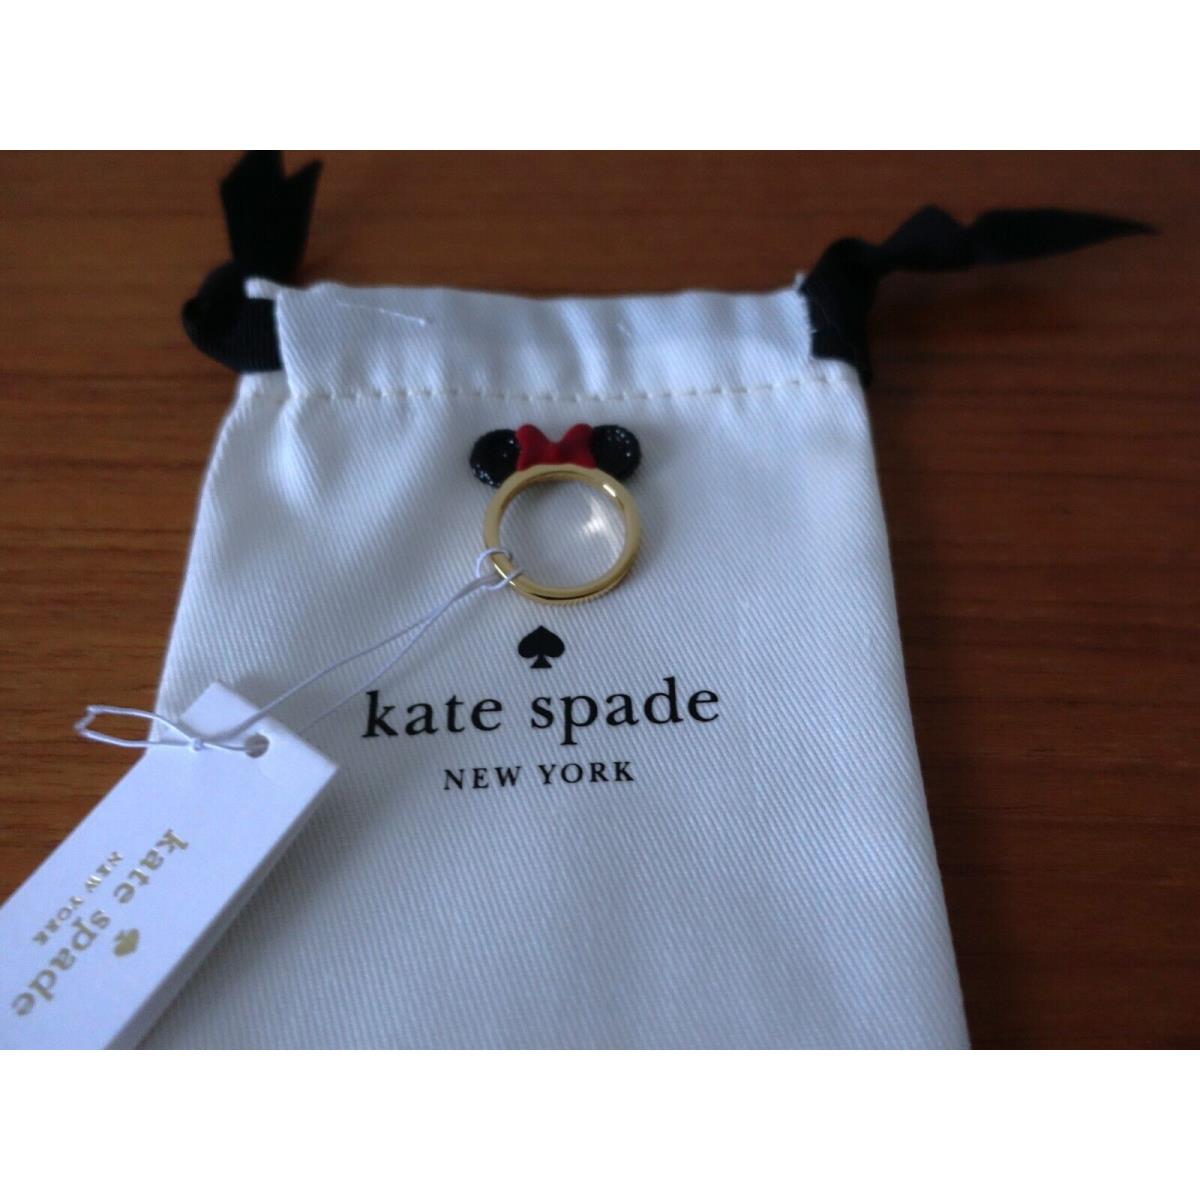 Kate Spade New York Minnie Ring. Size 7